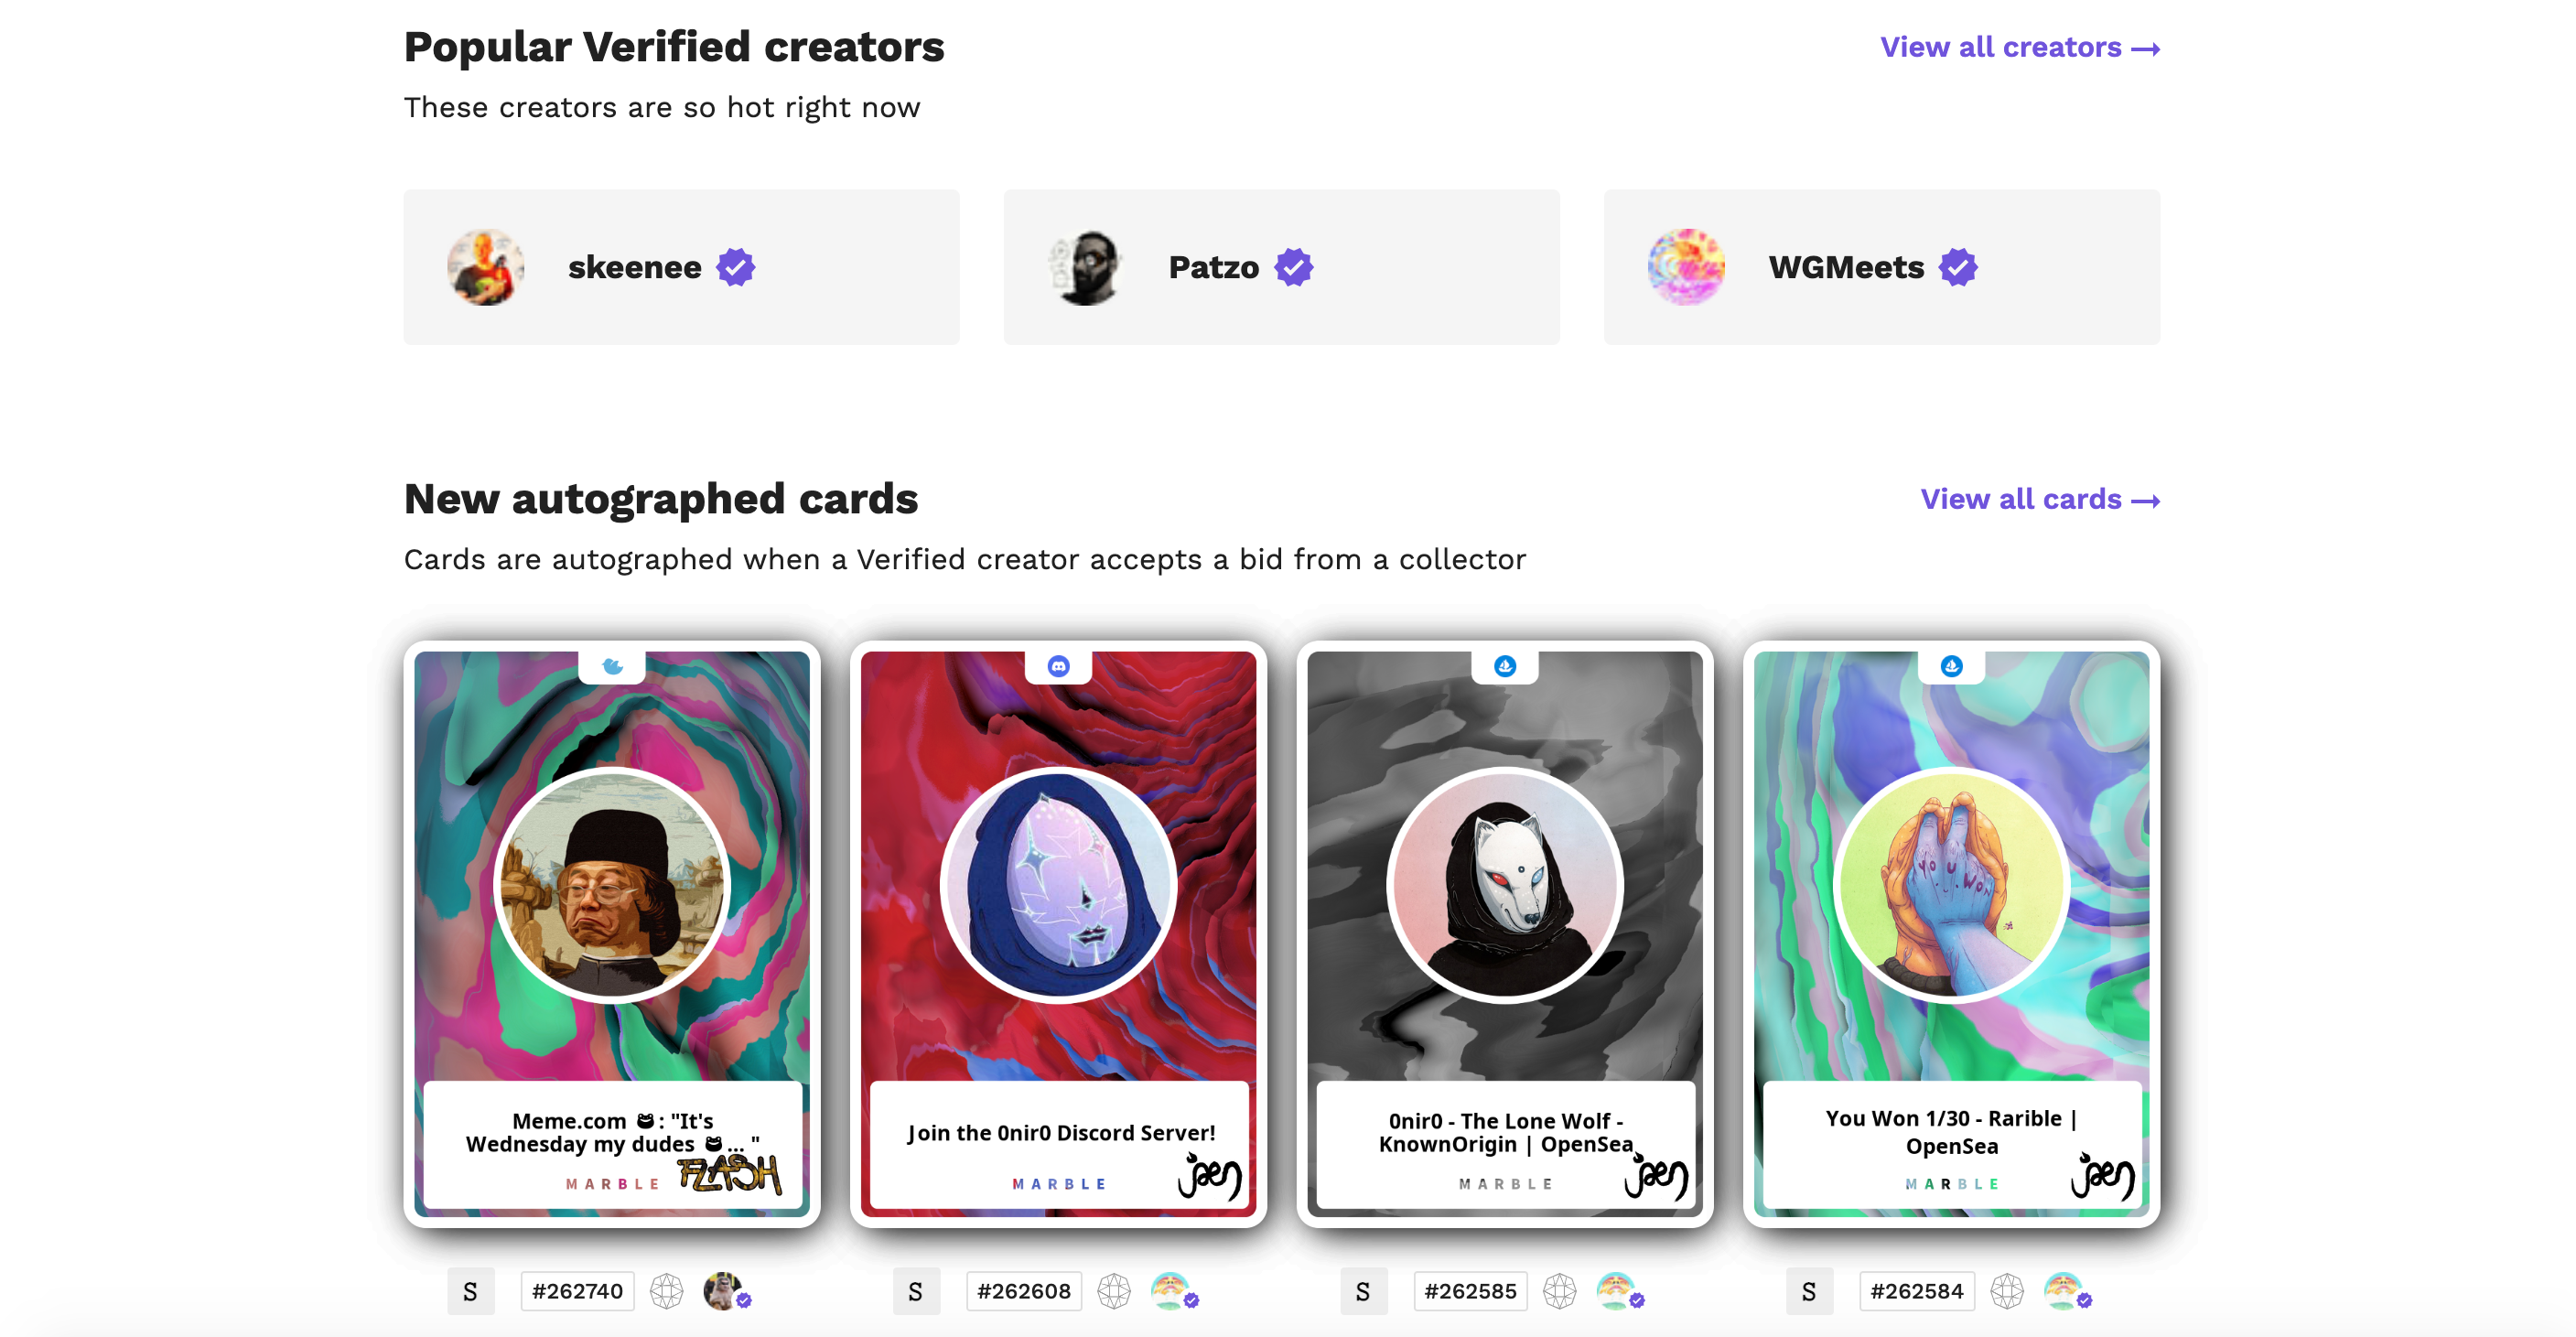 A look at some popular creators and a few freshly signed cards.